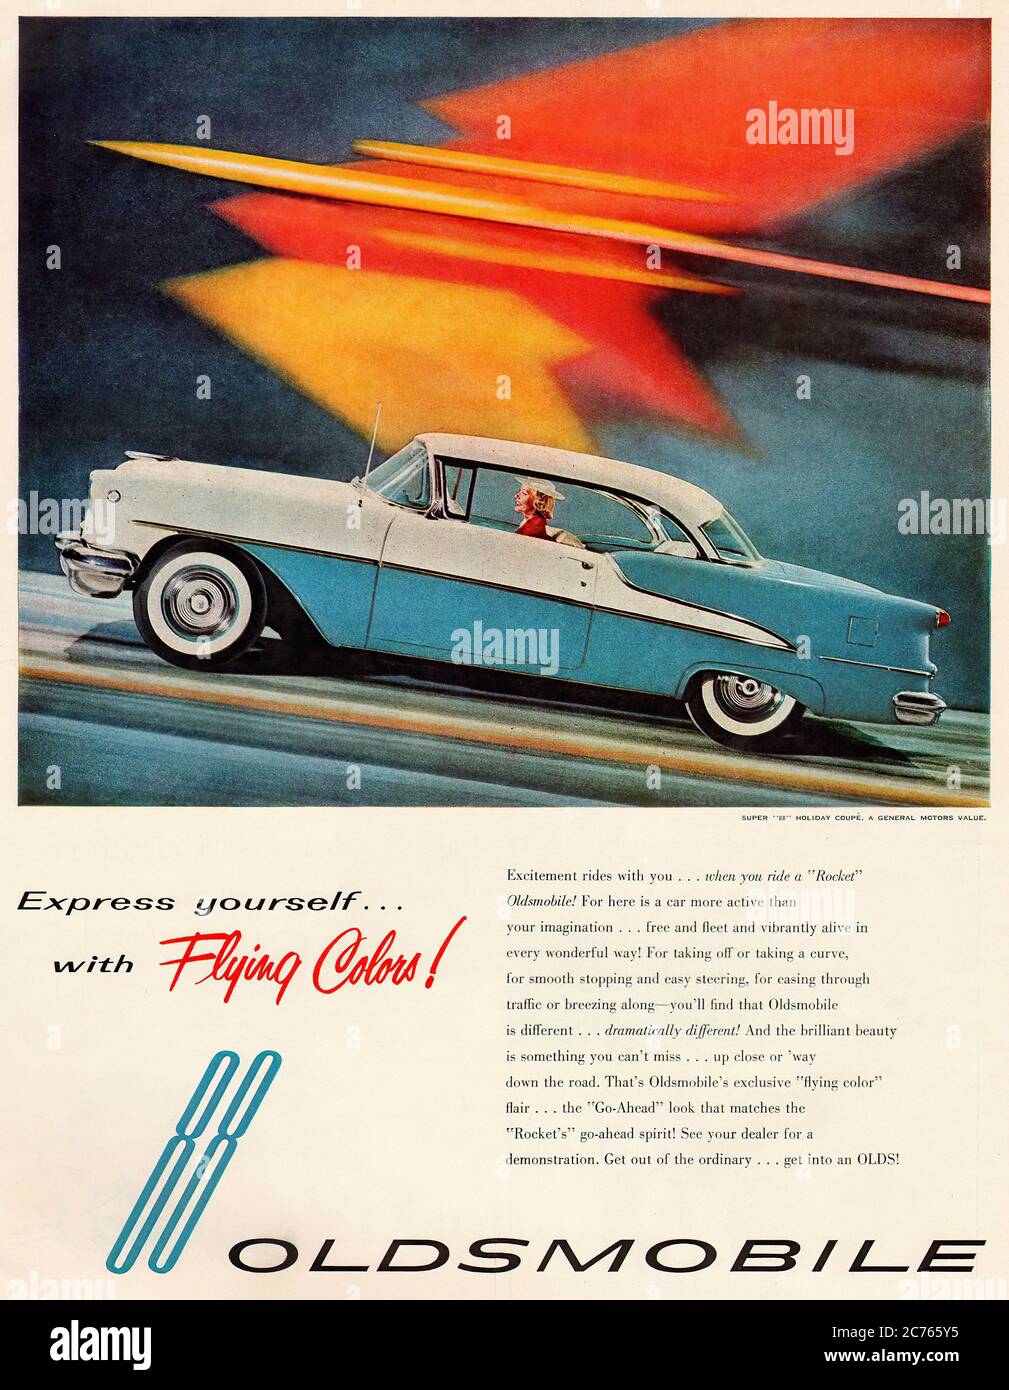 Oldsmobile   From 1955 - Vintage car advertising Stock Photo